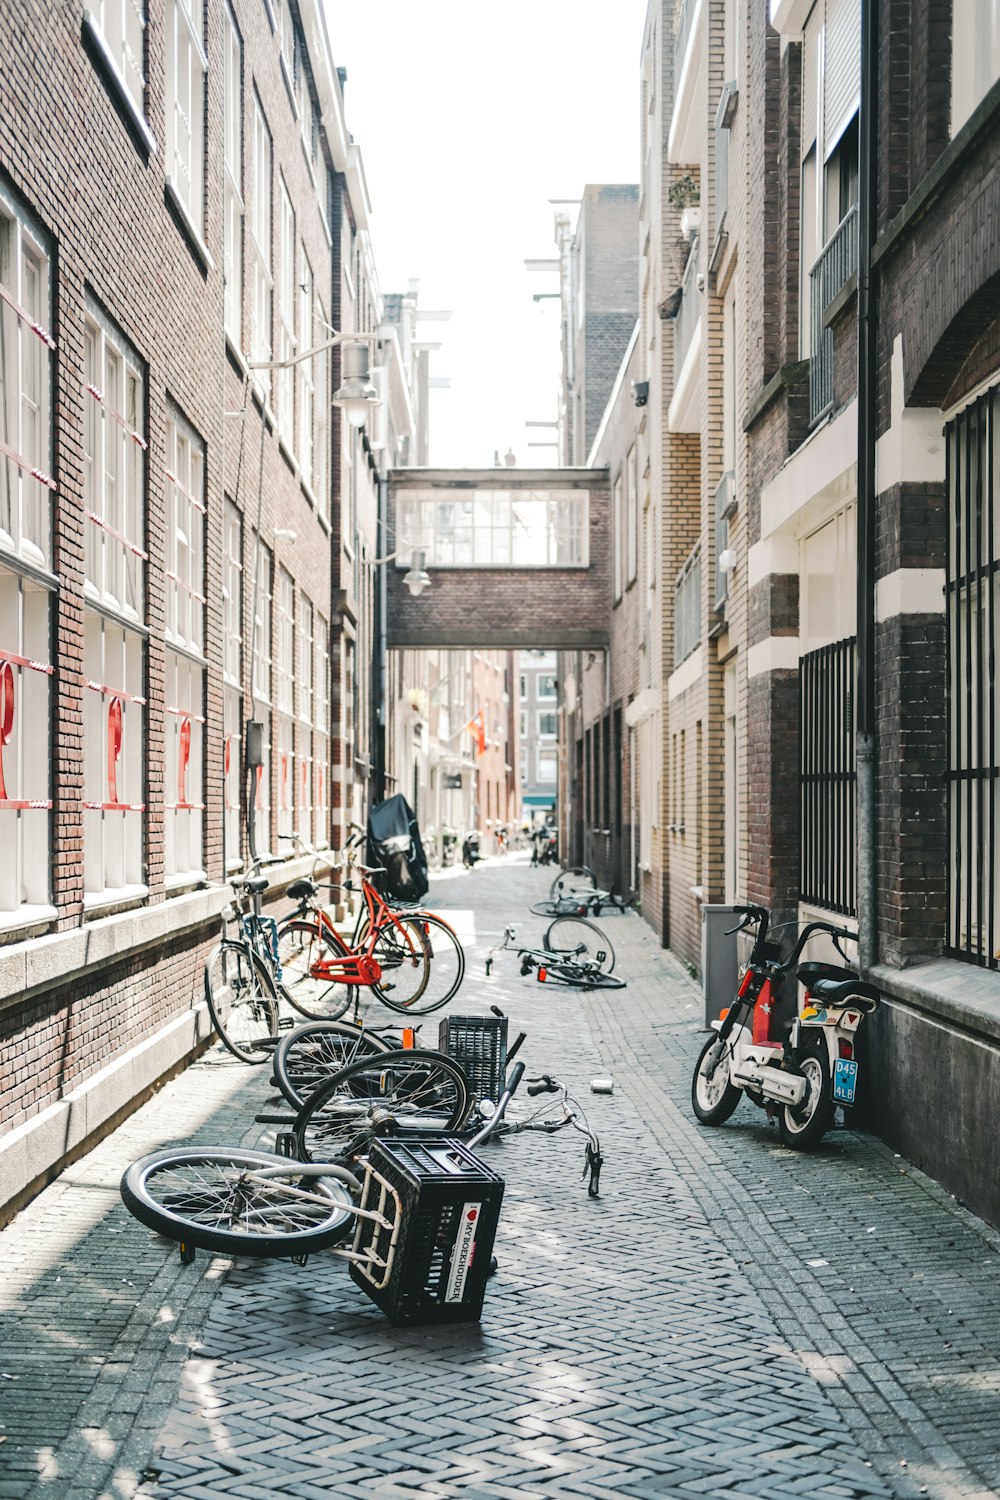 parked bicycles between concrete buildings